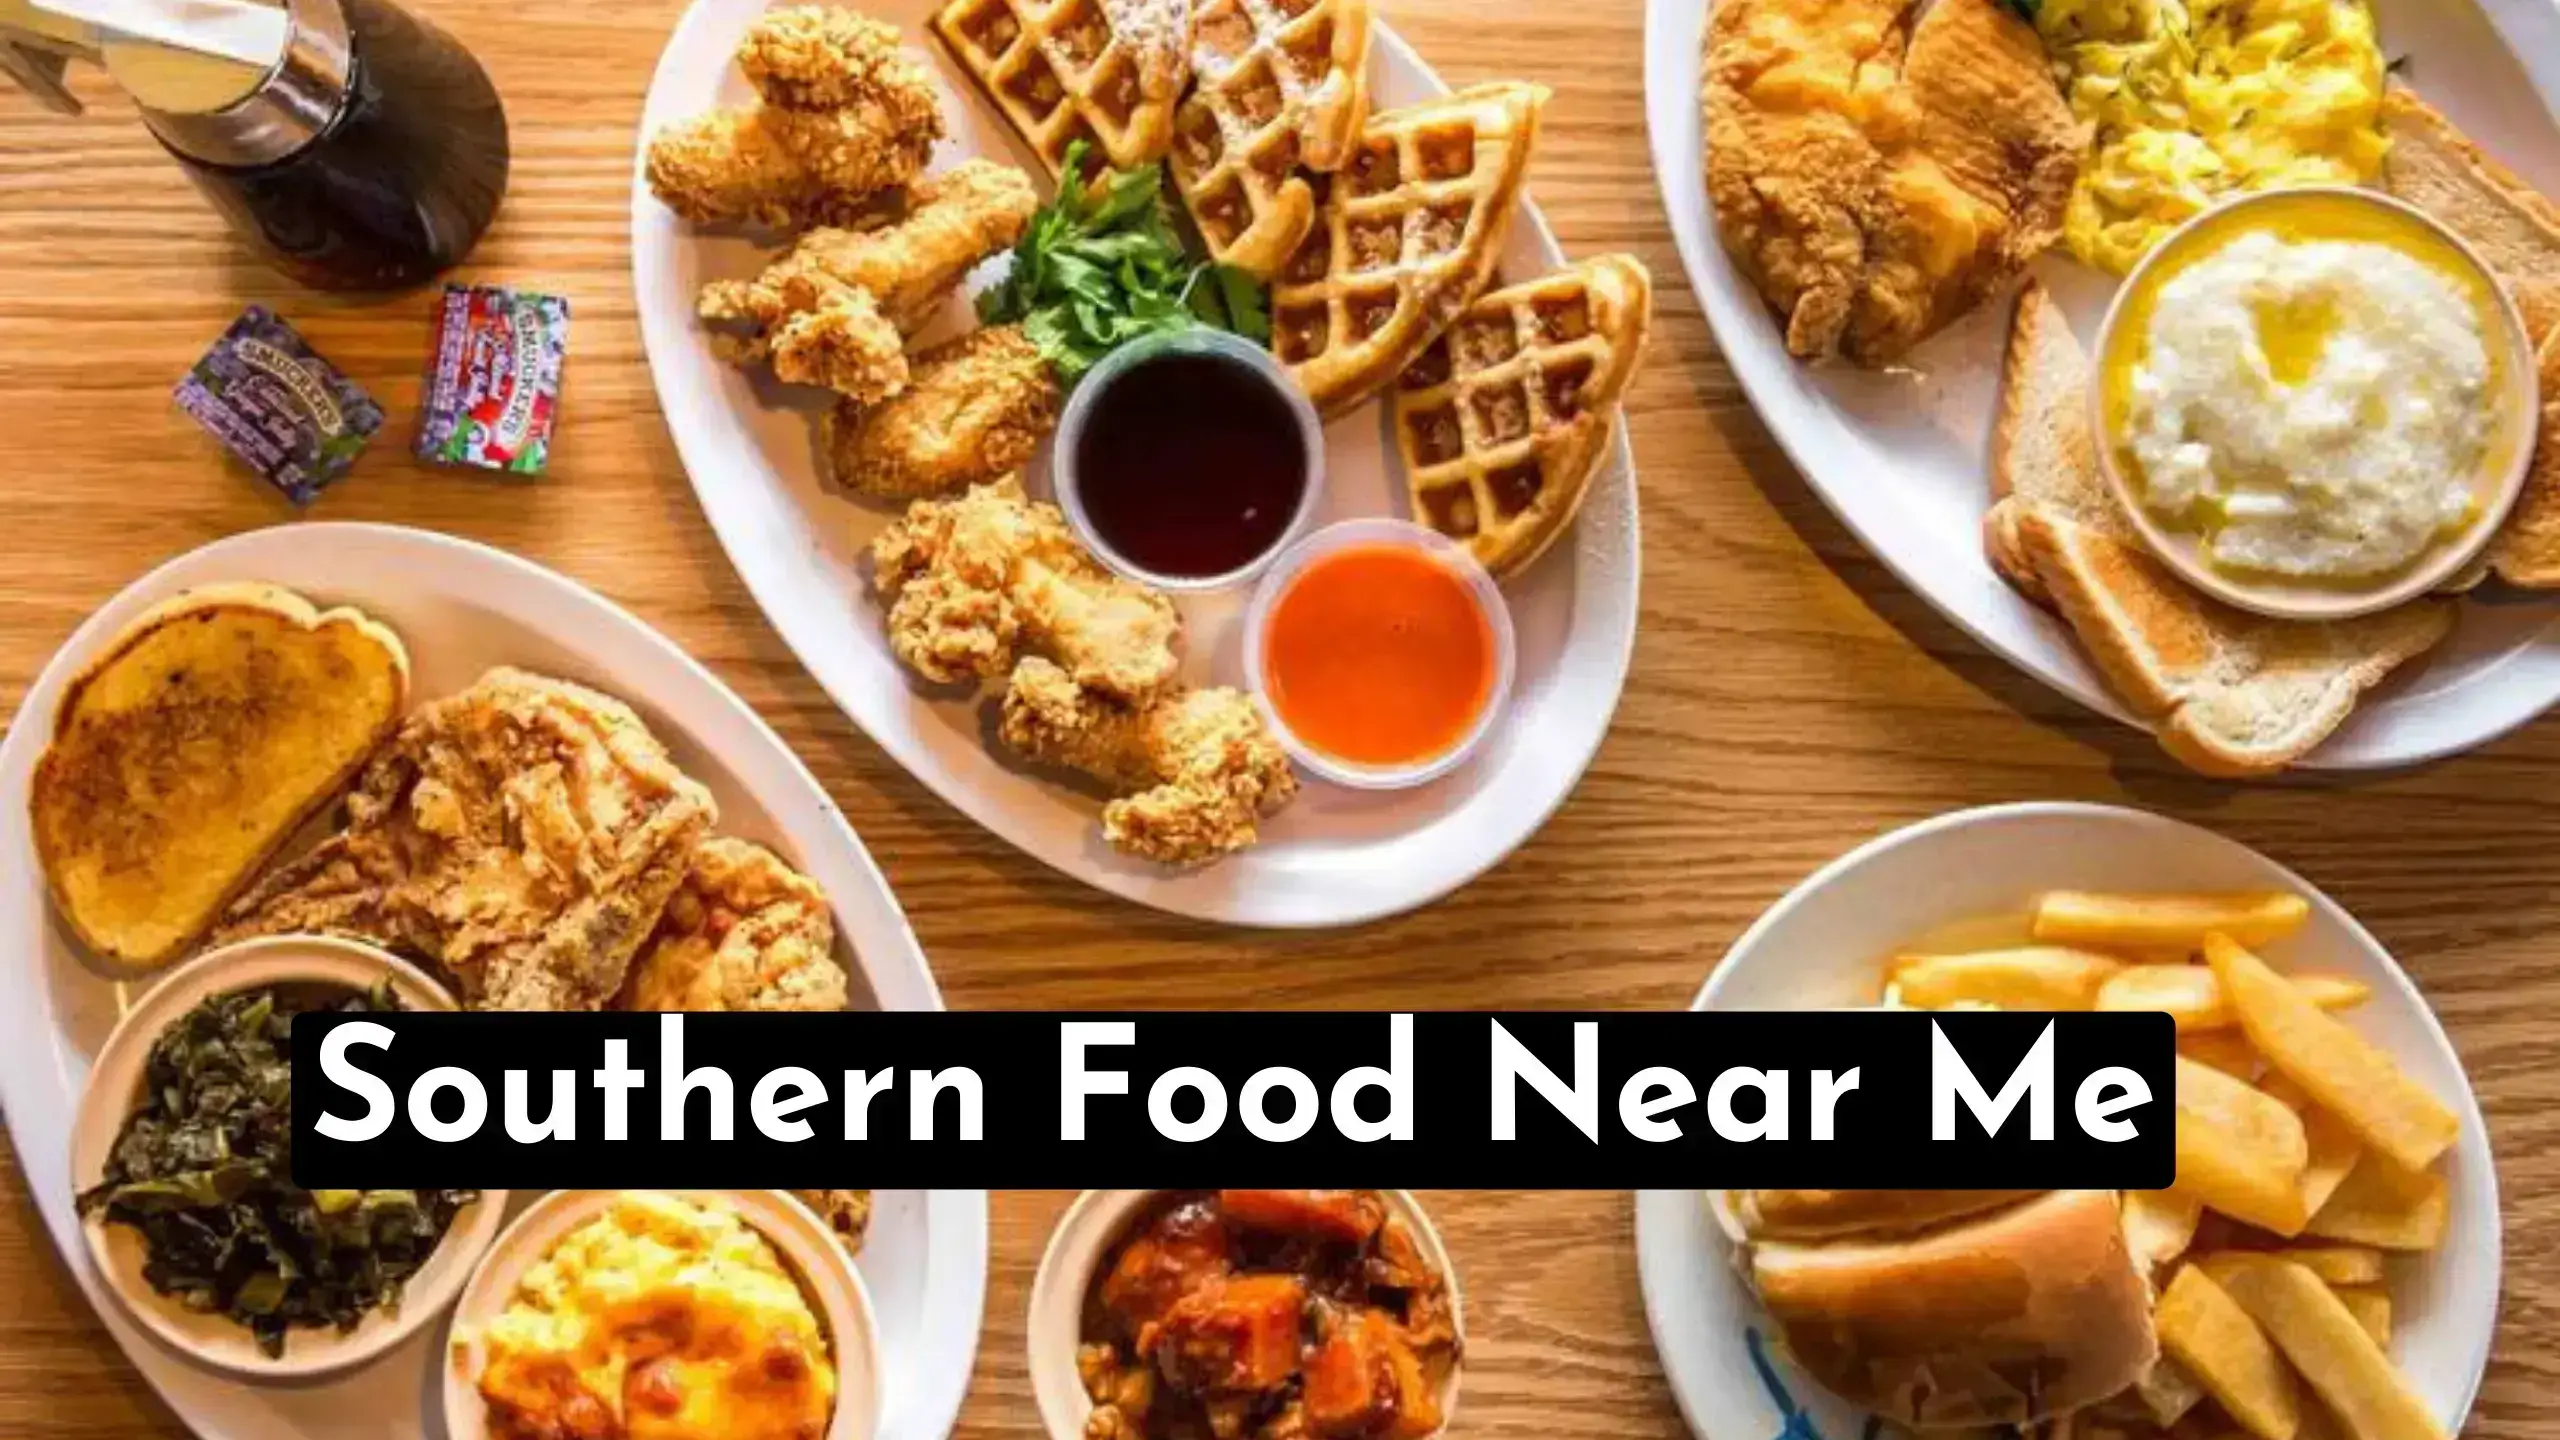 A Quick Guide To Discover Southern Food Near Me Locations | Also Quickly Find The Top Southern Must Try Dishes With Health Benefits & FAQs.